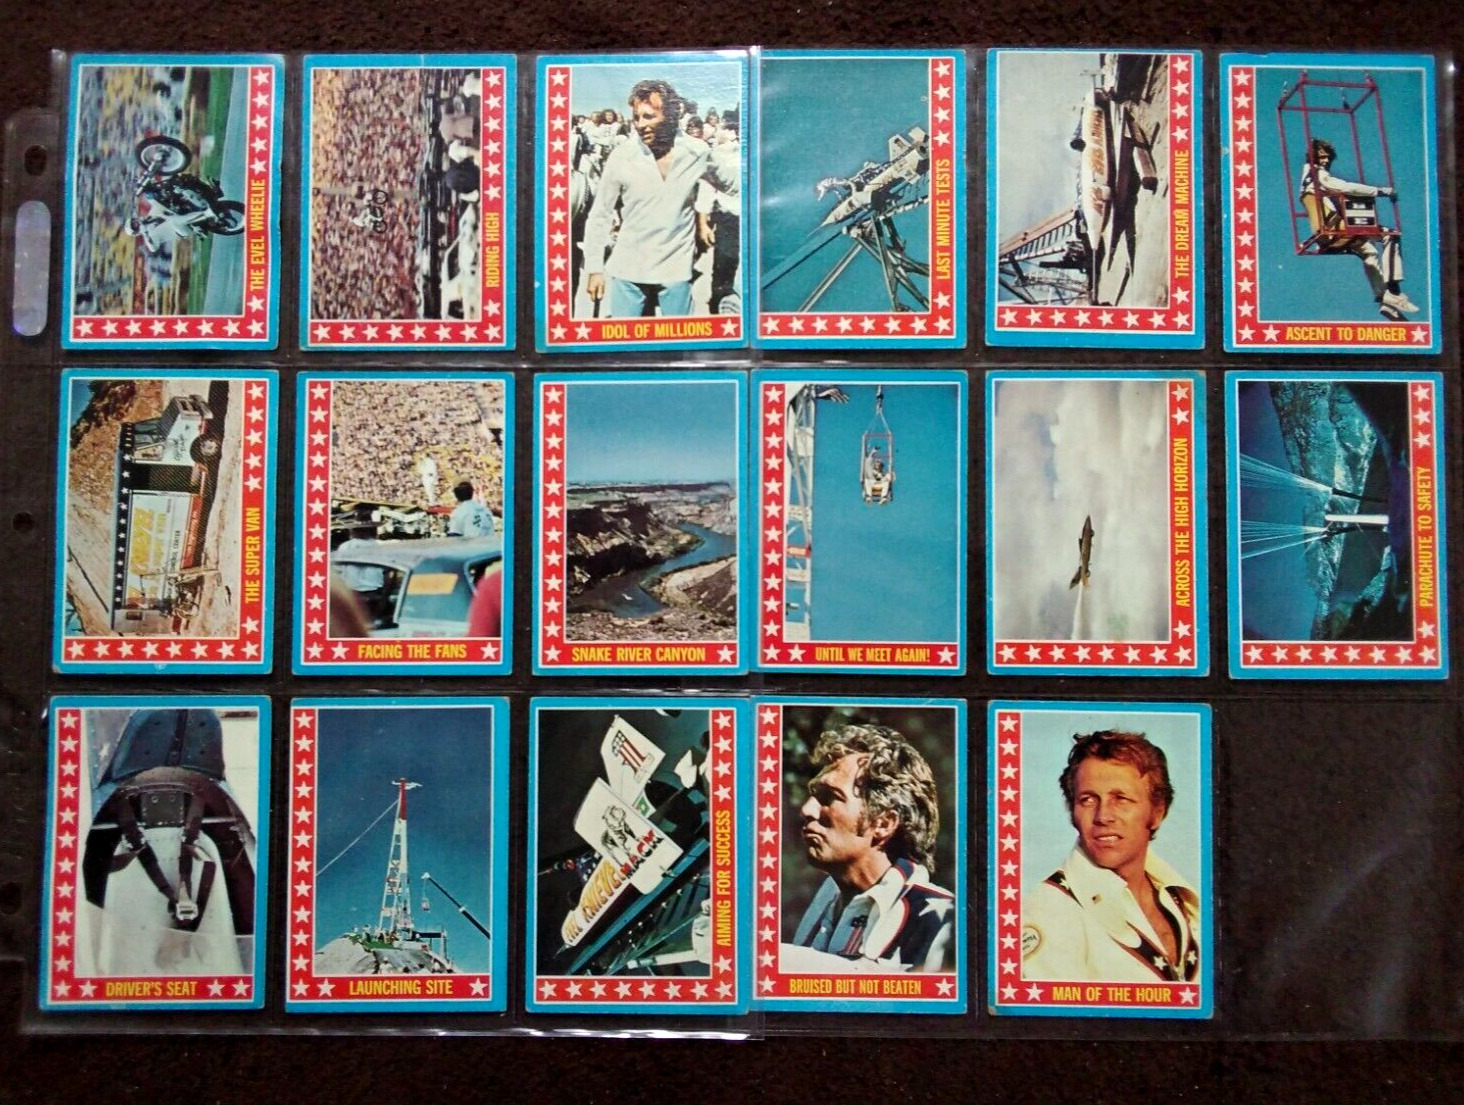 EVEL KNIEVEL #2-60 17 CARDS TOTAL IN 9 POCKET PAGES FAIR-VERY GOOD